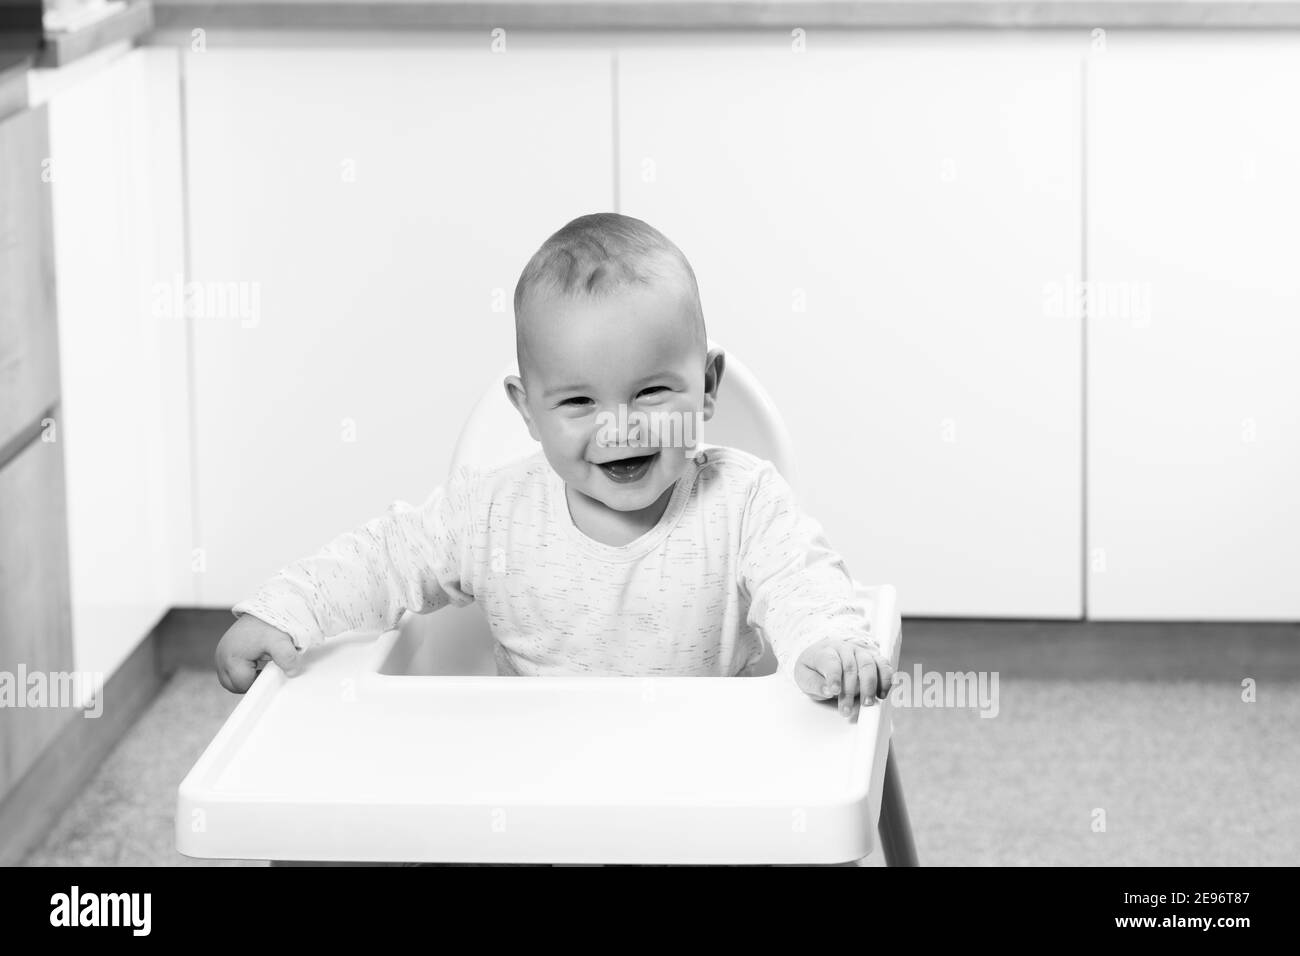 Portrait of Adorable Infant Baby Boy Sitting on the Chair Stock Photo